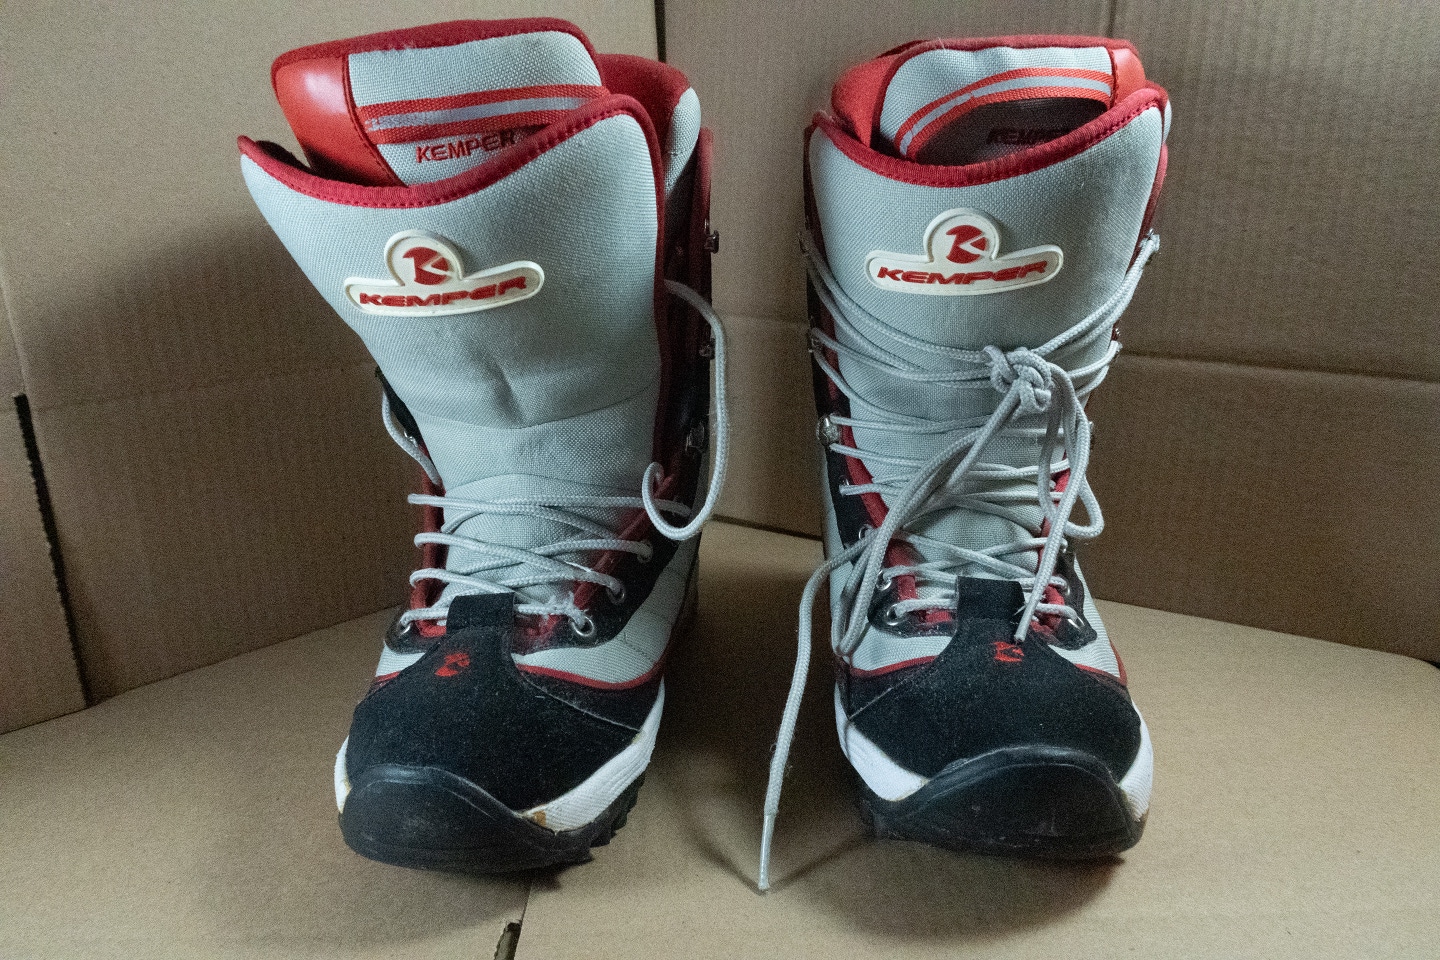 Used Kemper Snowboard Boots Size 8.0 (Women's 9.0)